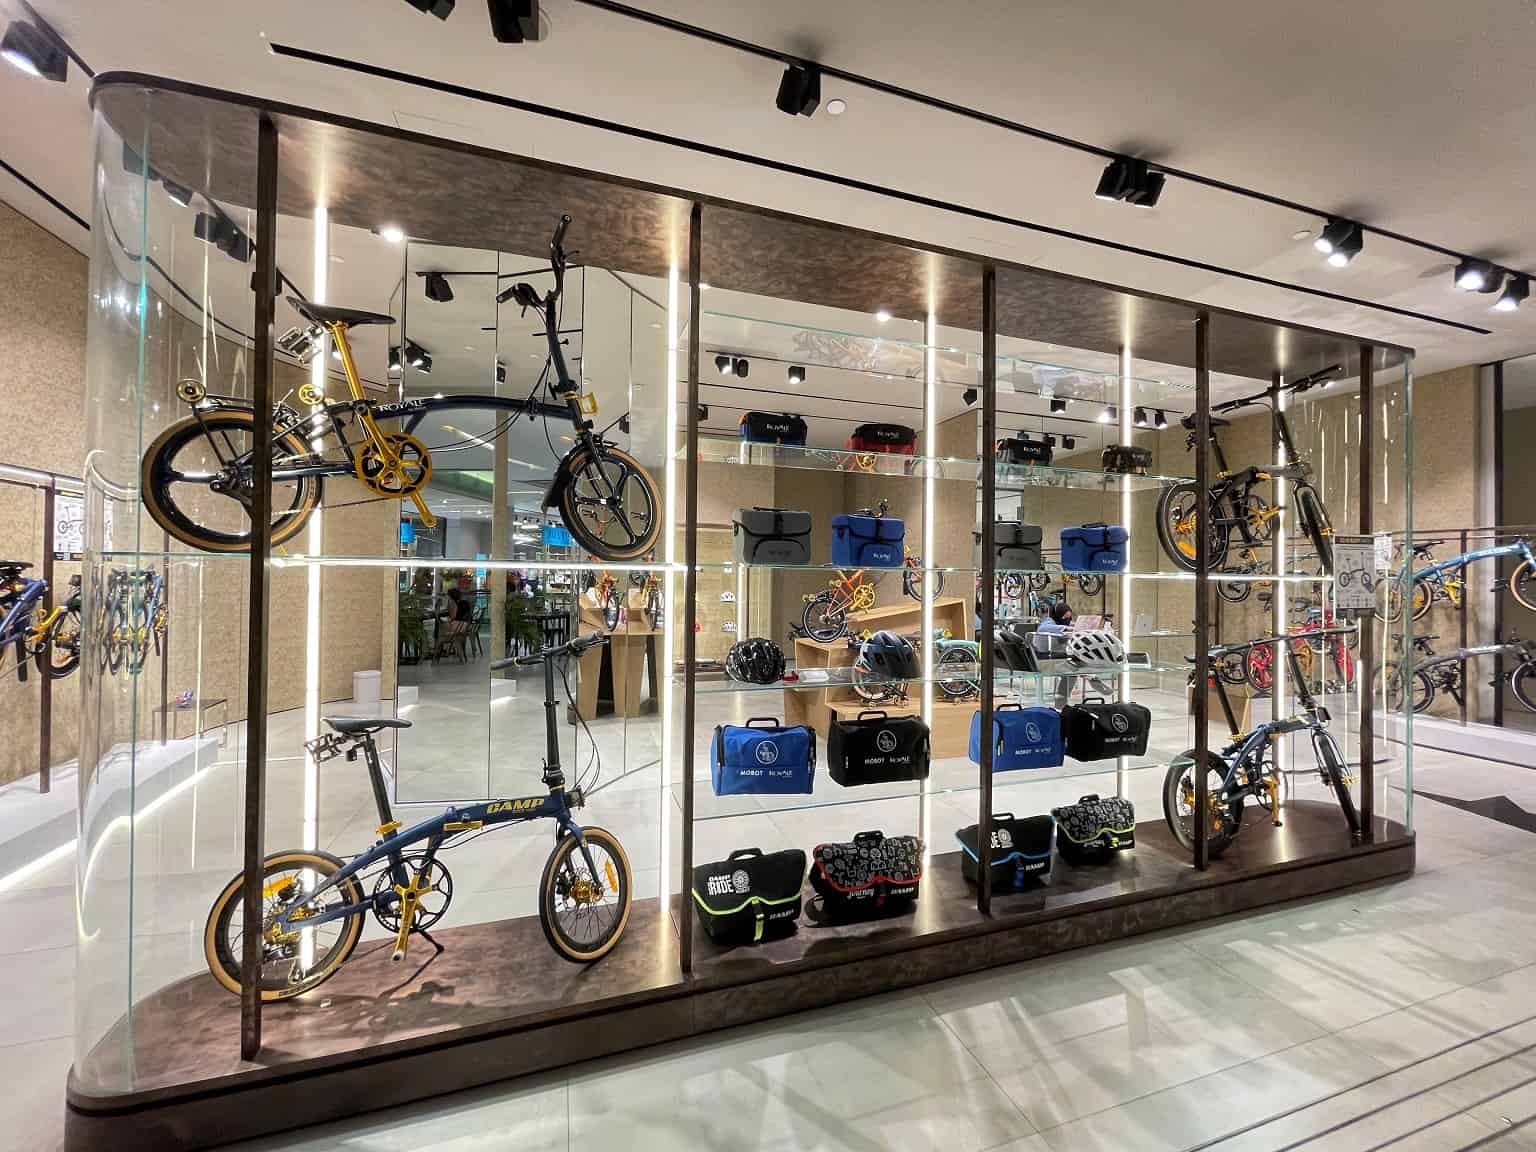 Royale by MOBOT Scotts Square 3 - Press release: MOBOT x ROYALE Opens Bicycle Shop In Scotts Square Orchard